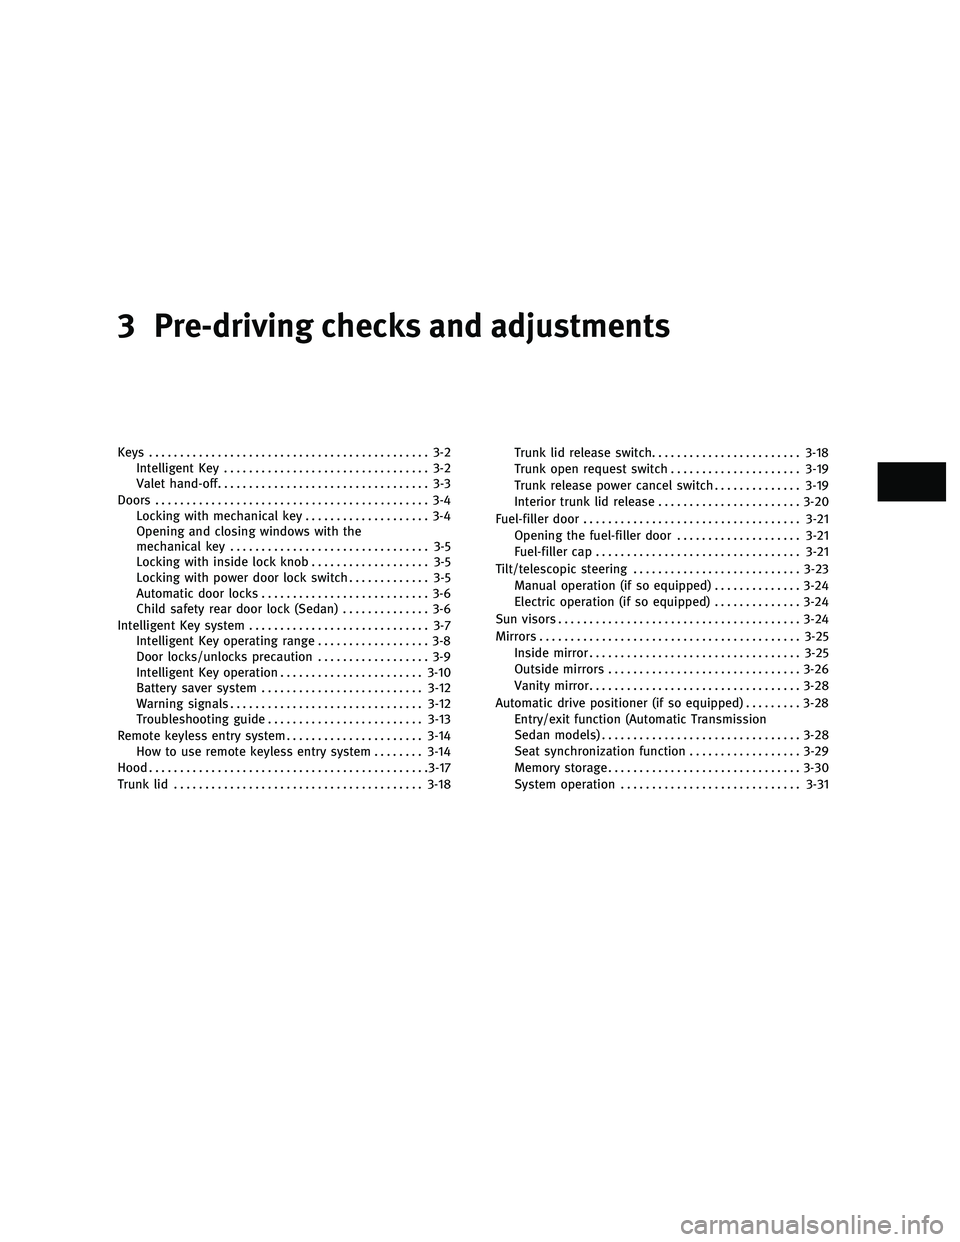 INFINITI G 2010  Owners Manual 3 Pre-driving checks and adjustments
Keys............................................. 3-2
Intelligent Key ................................. 3-2
Valet hand-off .................................. 3-3
D